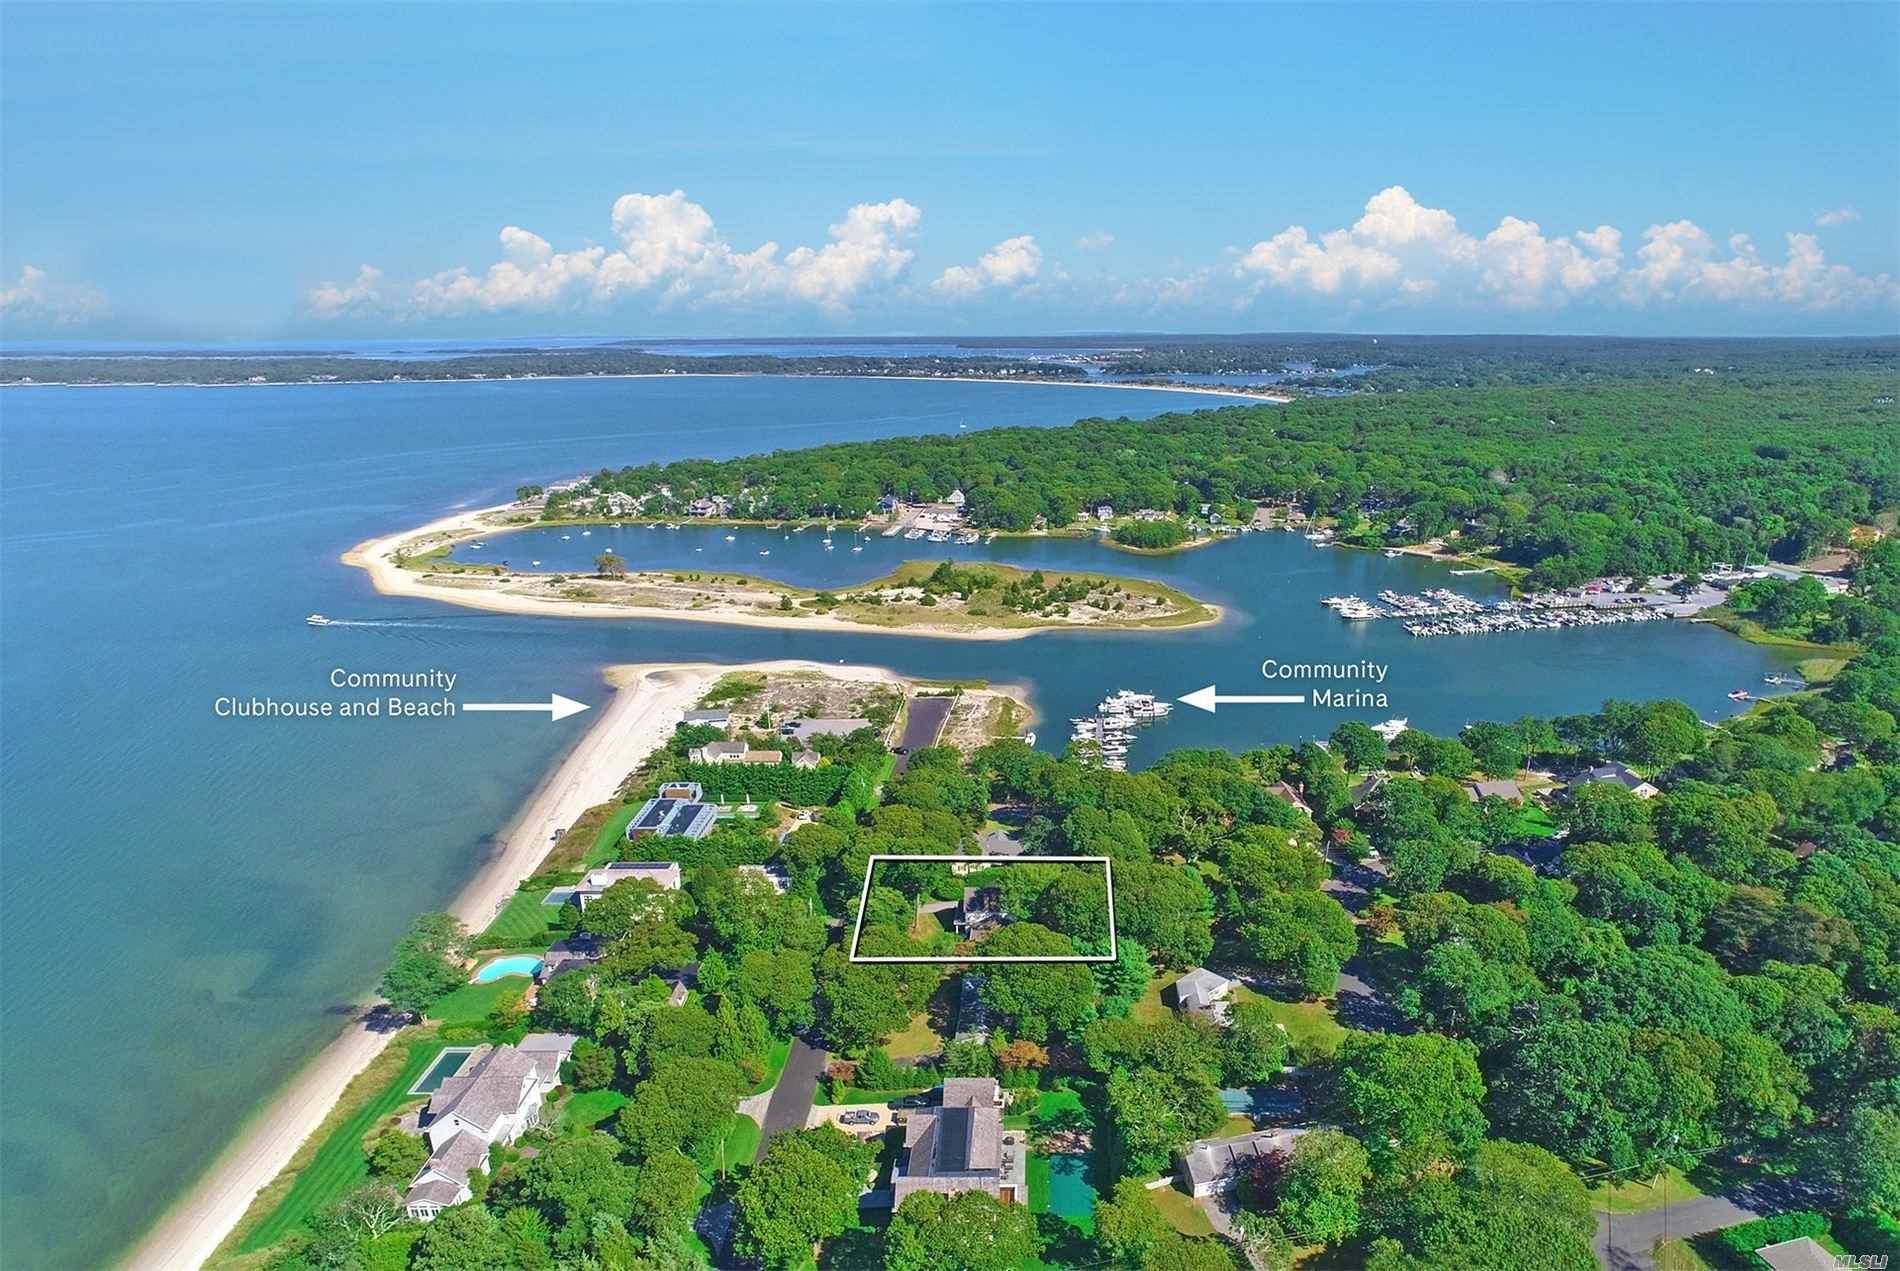 Situated in Northampton Colony within steps to the community bayfront club house and private marina, this home is just four miles to the heart of Sag Harbor Village.